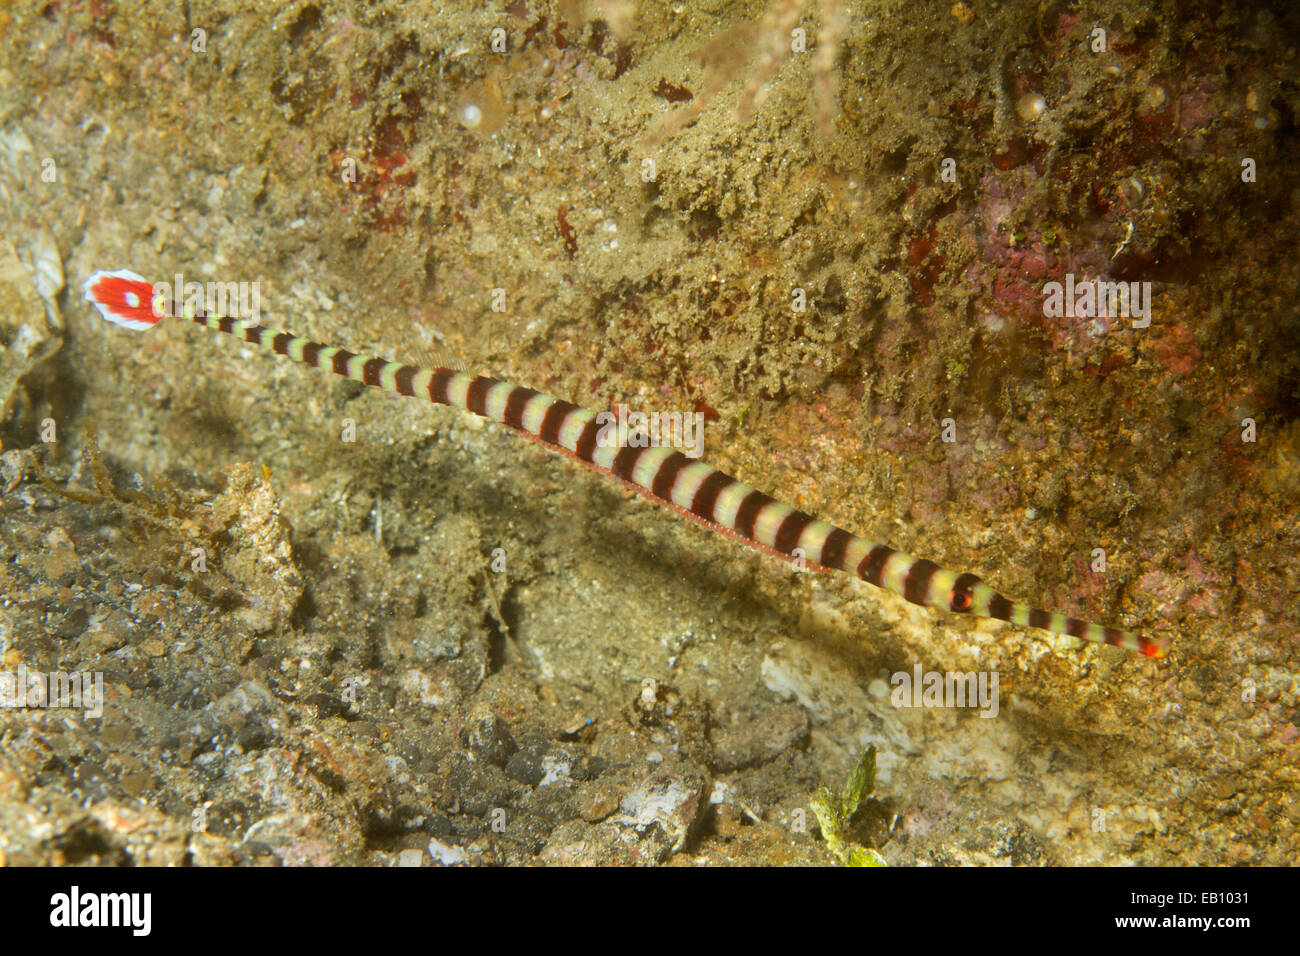 Ringed Pipefish carries its egggs with it pasted to it's belly (Doryrhamphus dactyliophorus) Lembeh Straits,Indonesia Stock Photo